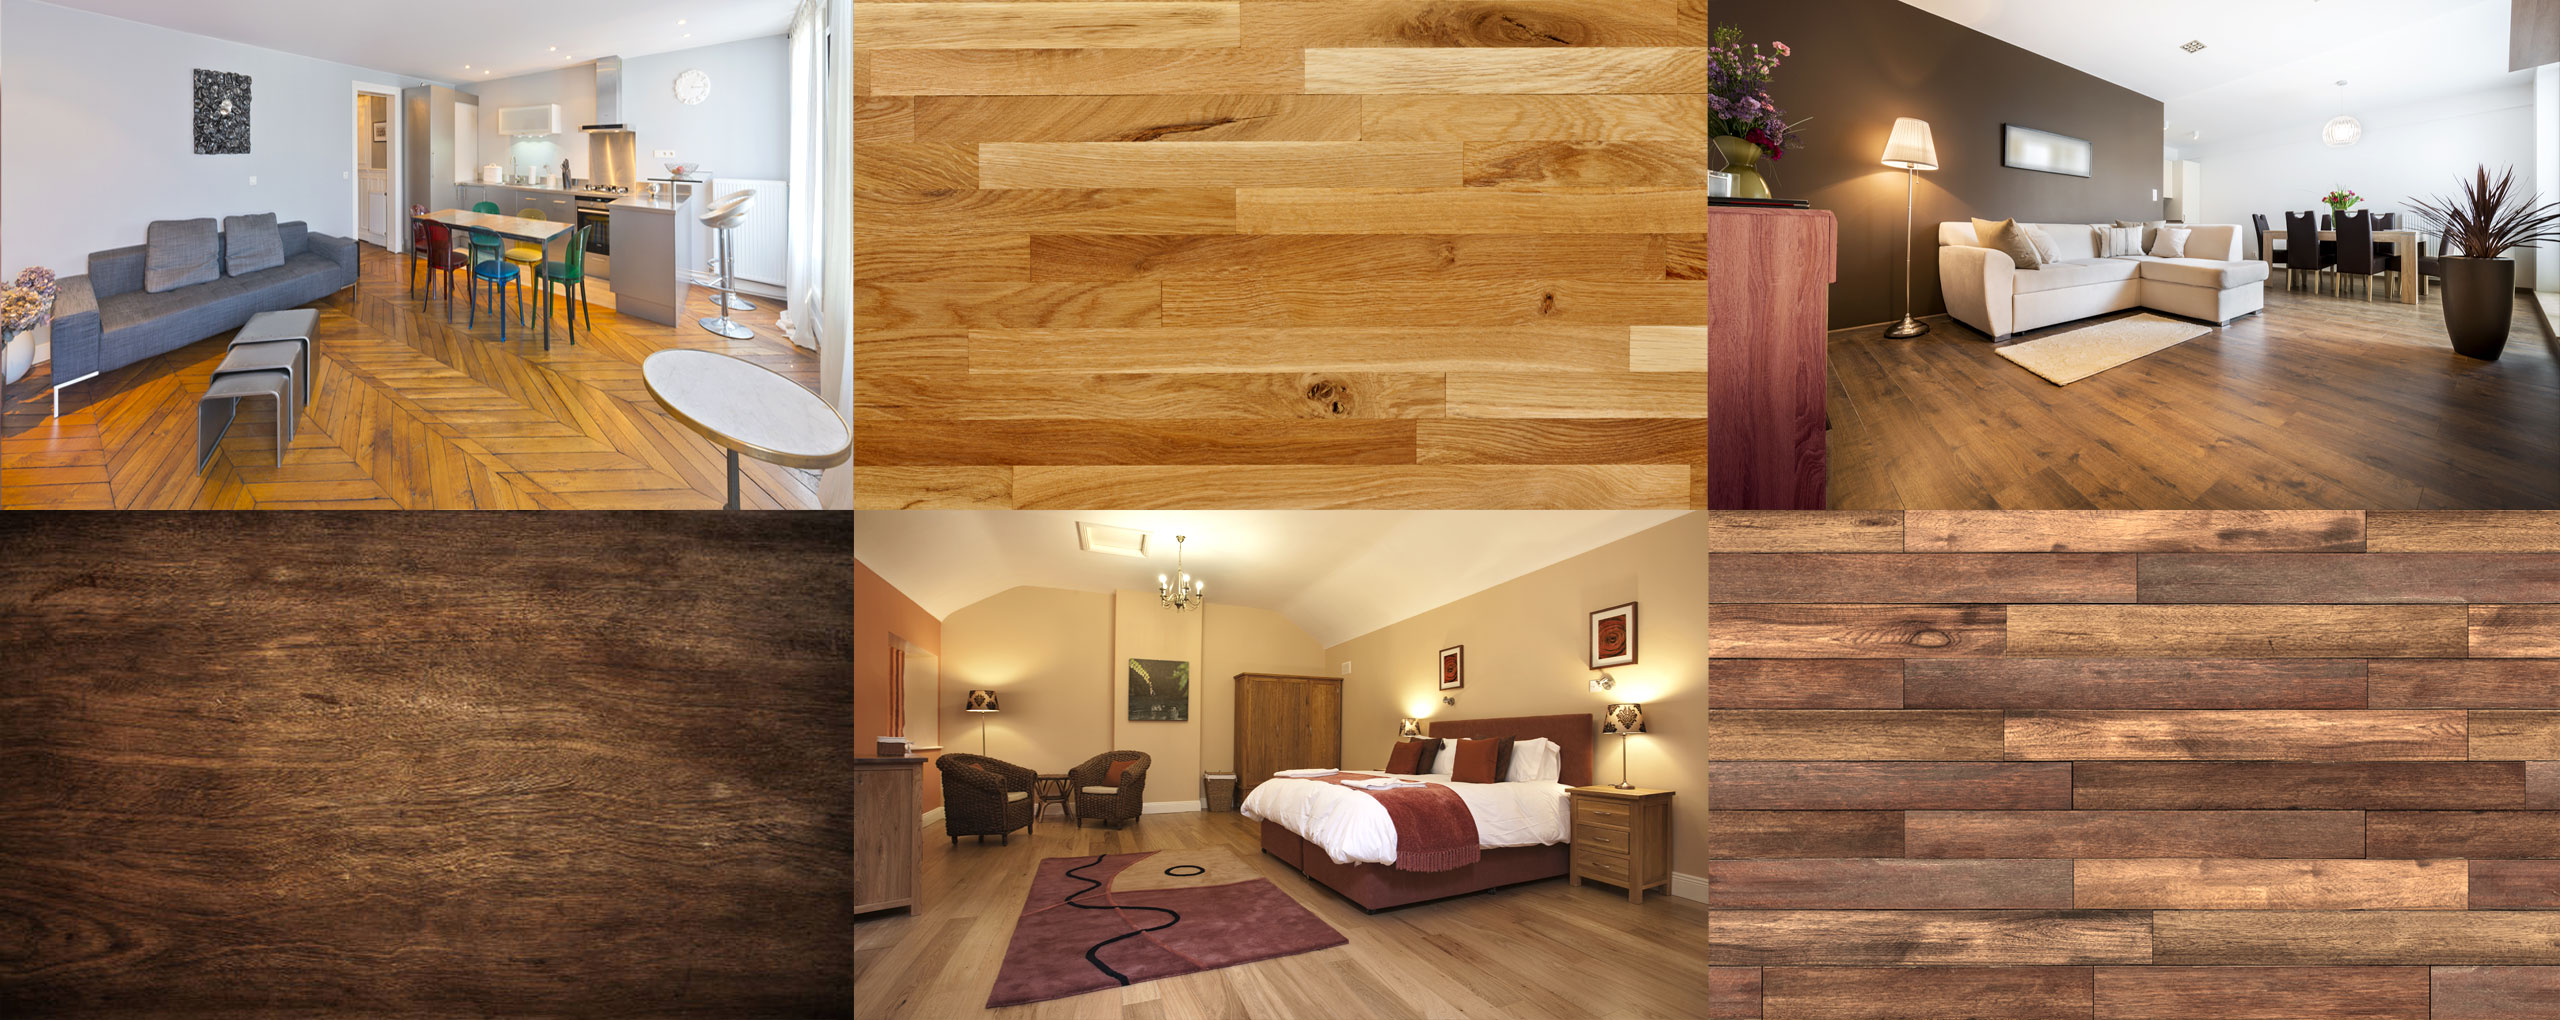 Central Jersey Wood Flooring Installation Company 